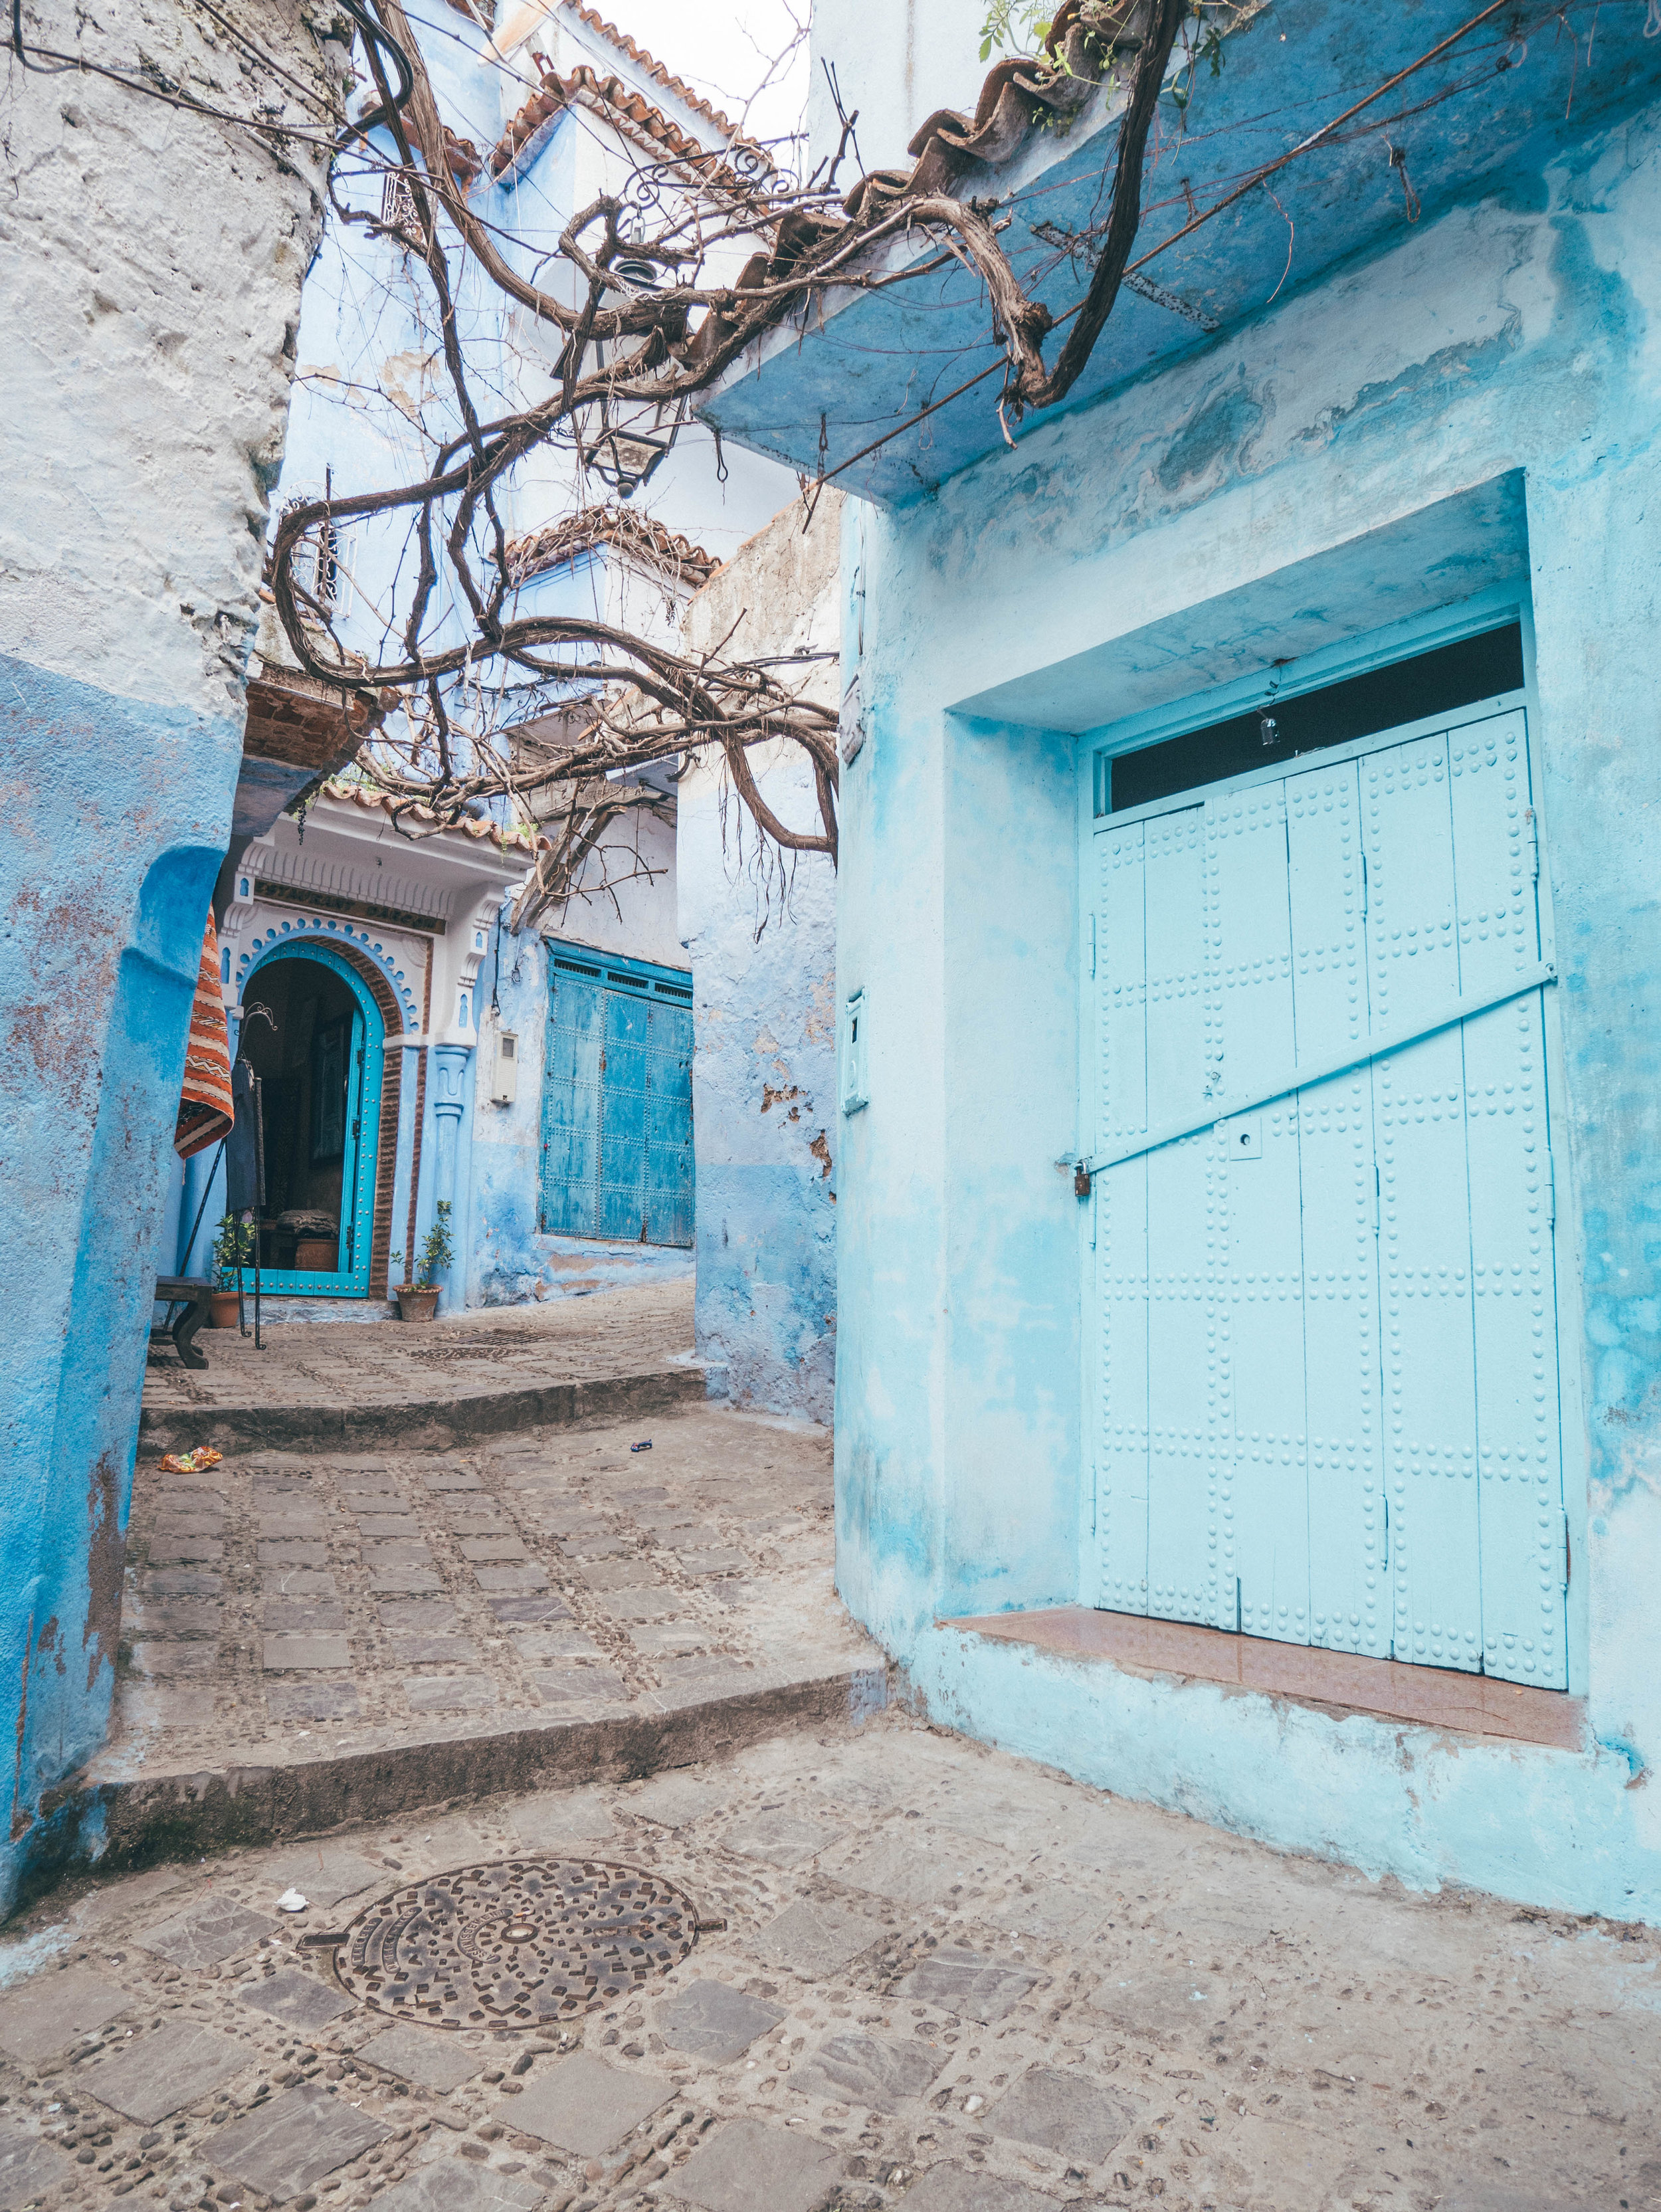 Yes, more blue! - Chefchaouen - Morocco